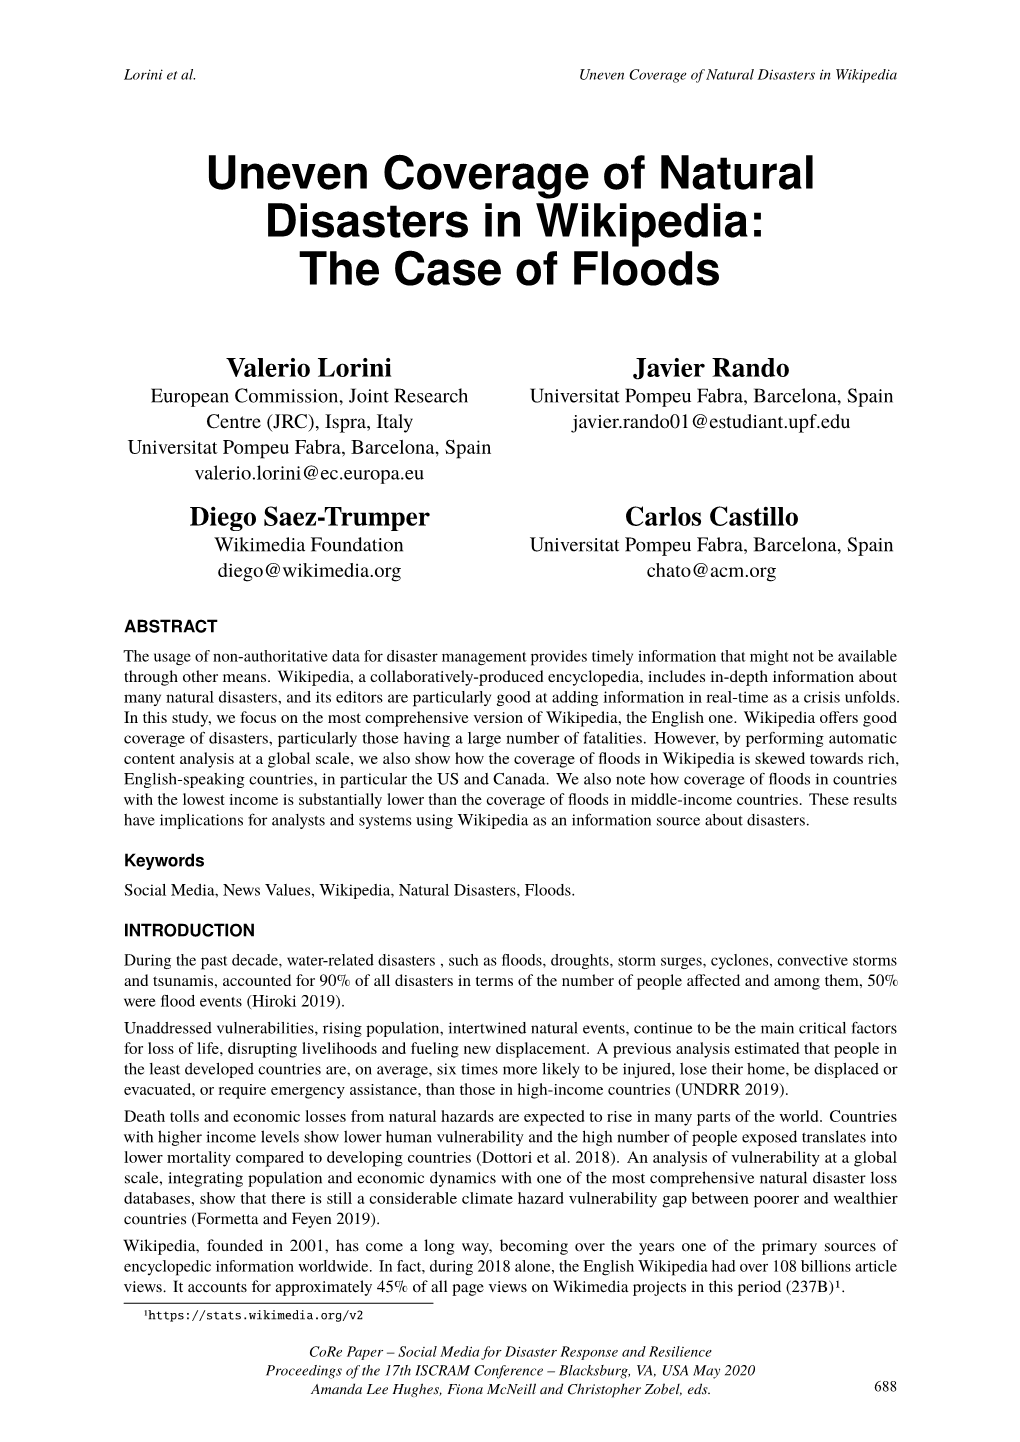 Uneven Coverage of Natural Disasters in Wikipedia: the Case of Floods